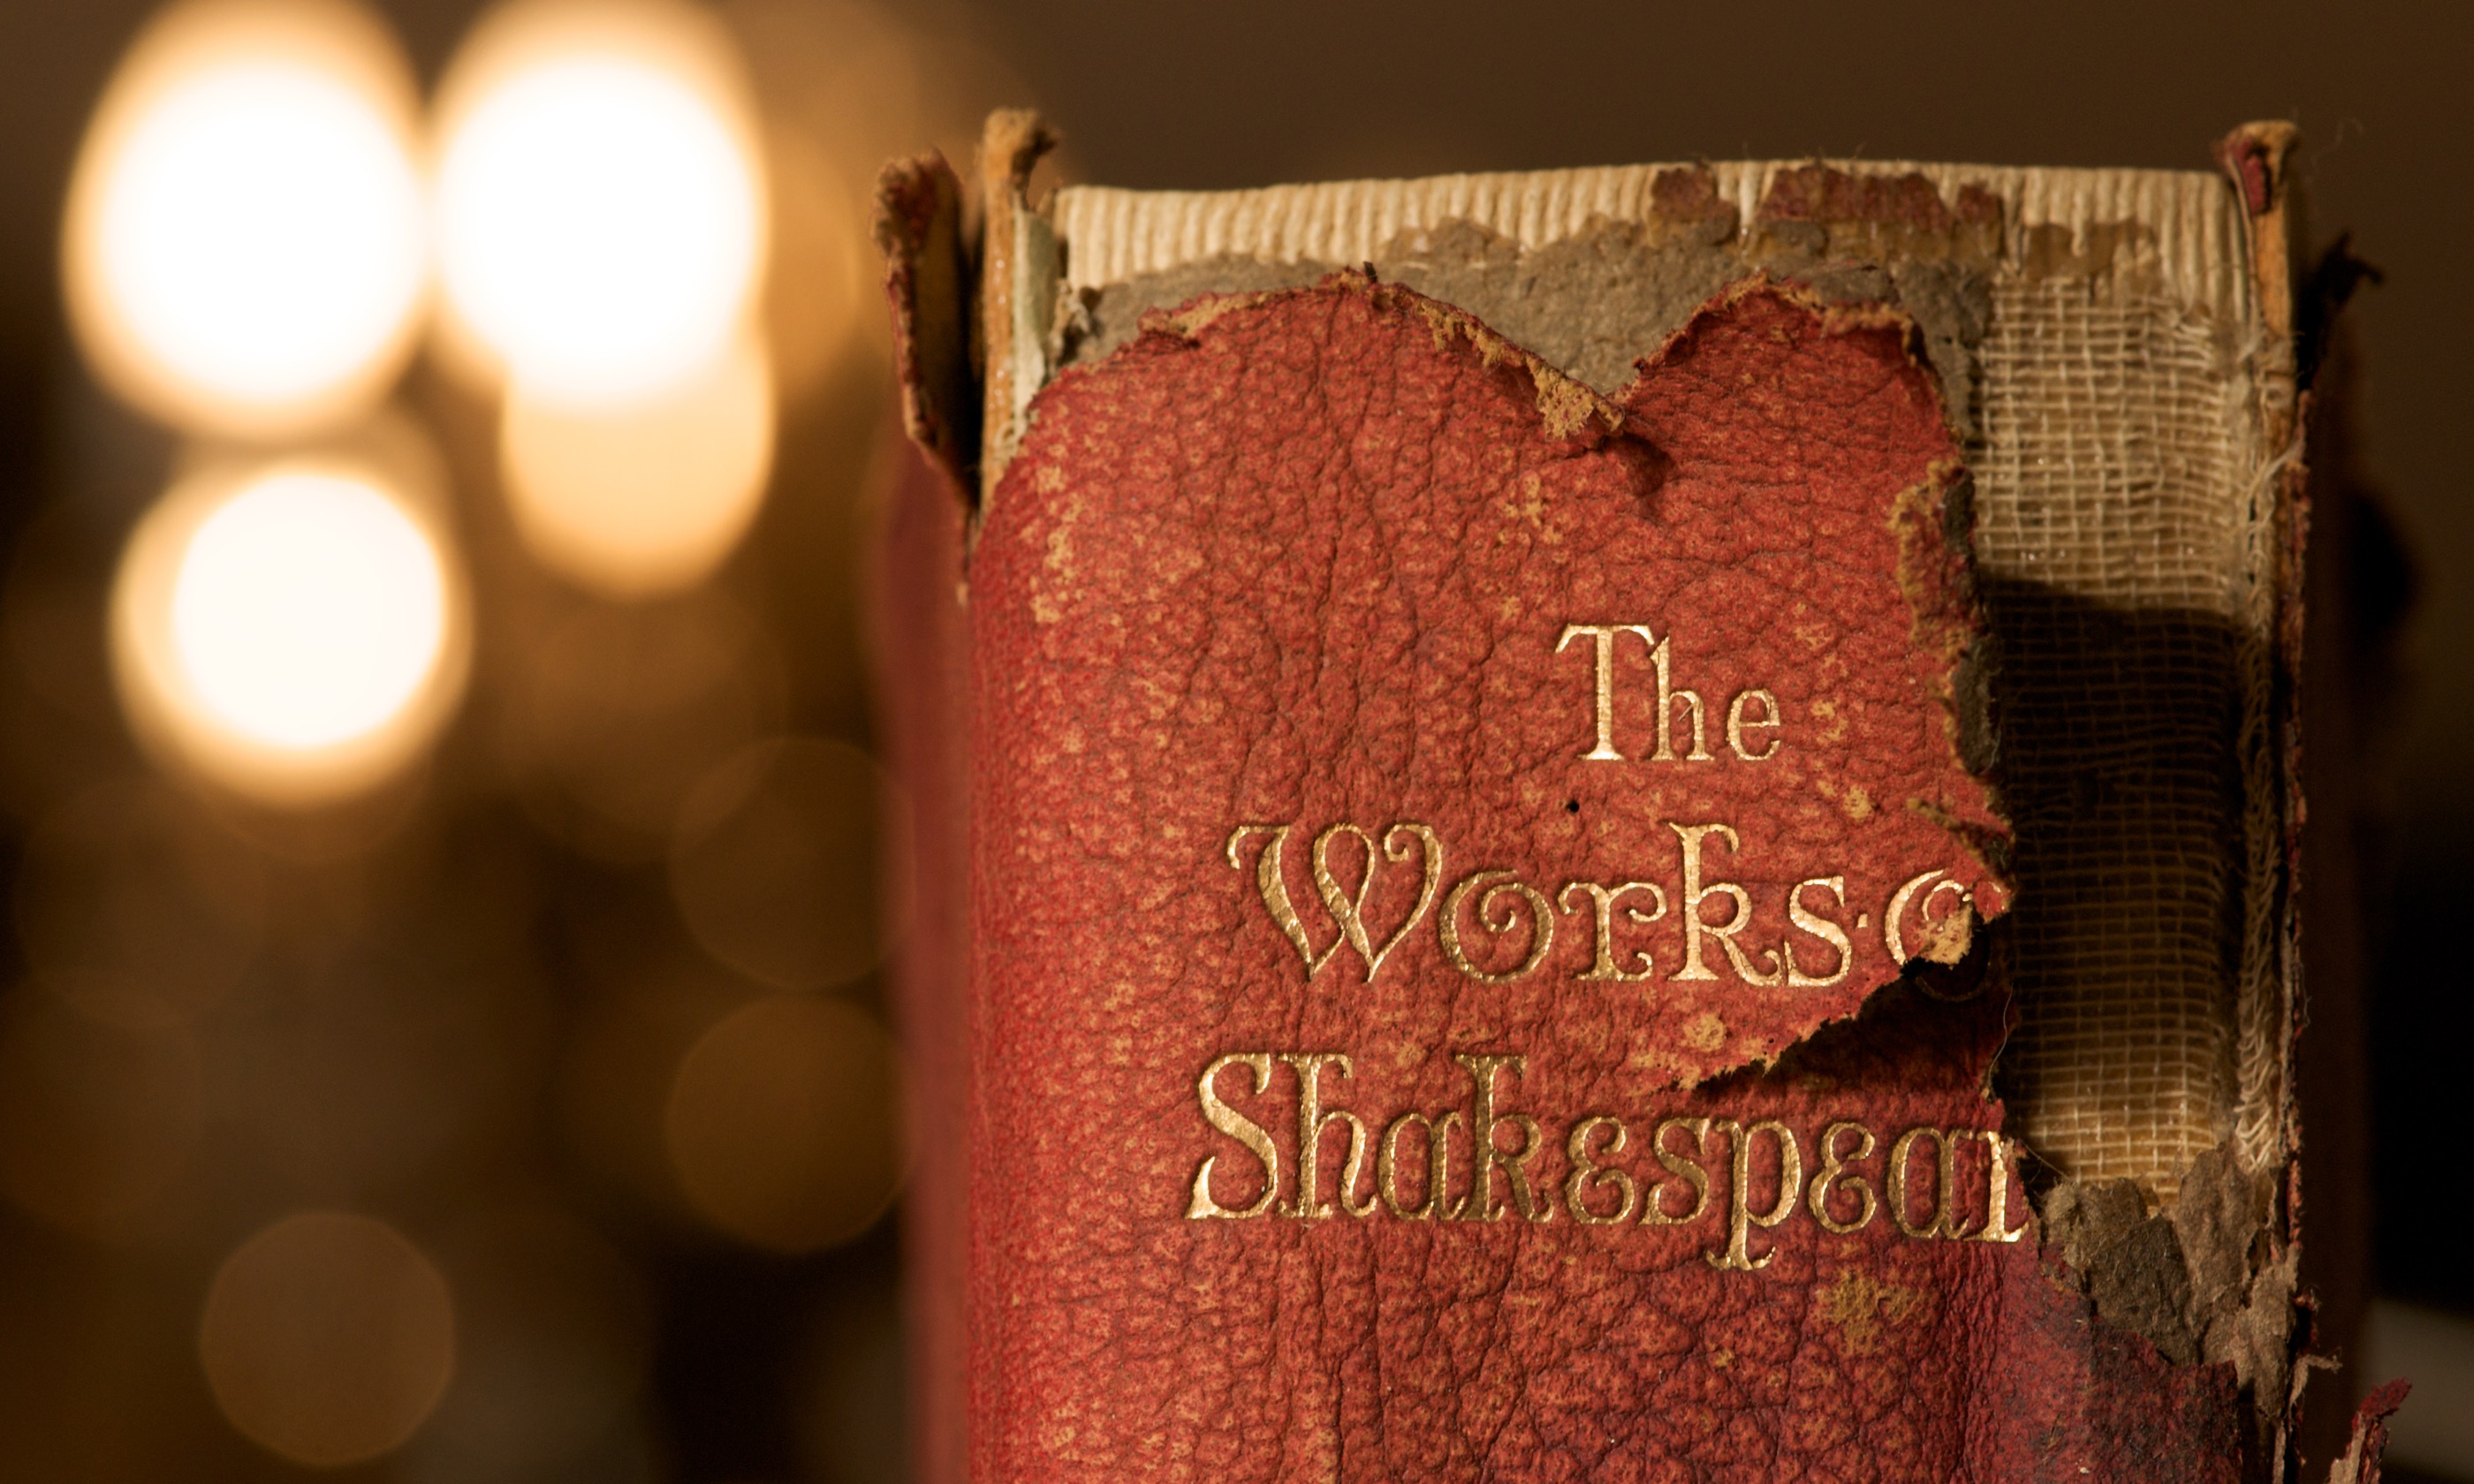 The Works of Shakespeare (Shutterstock: see main credit below)